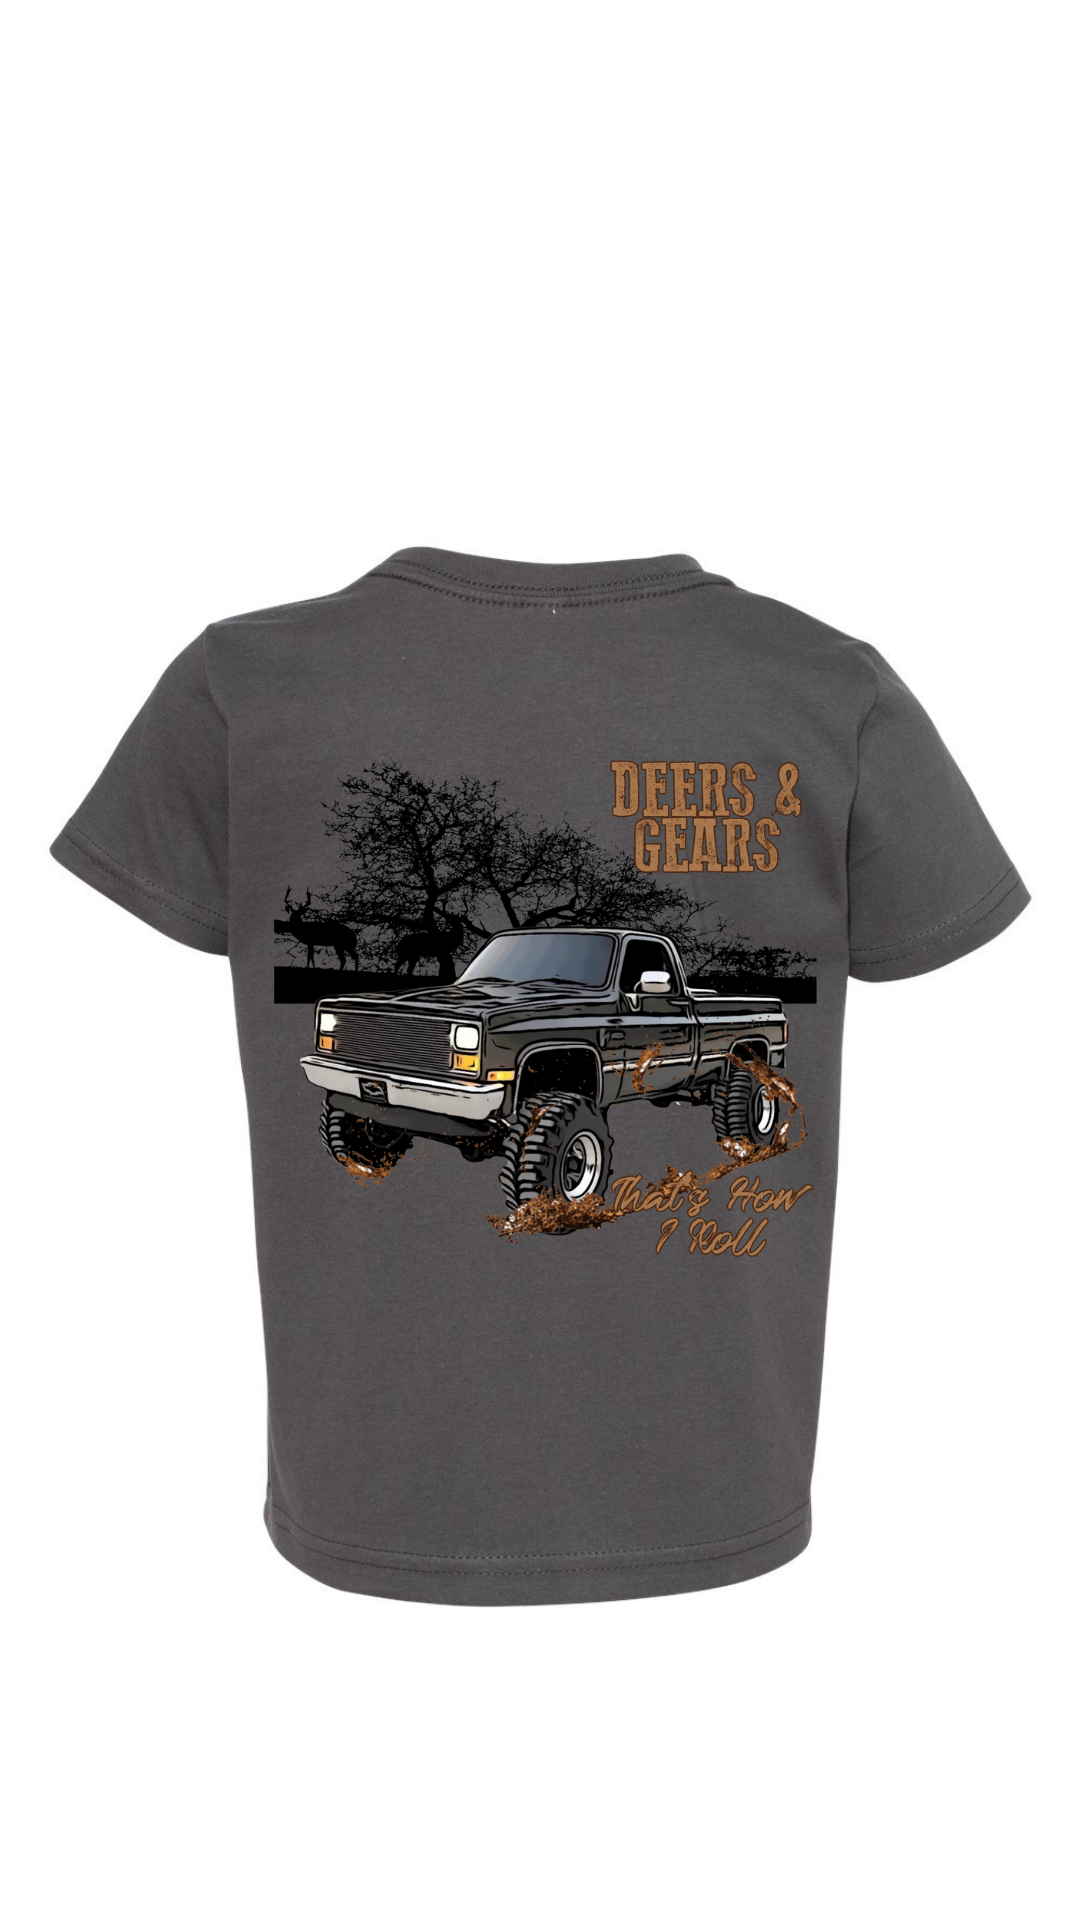 Deers and Gears Cotton Pickin’ Southern Apparel